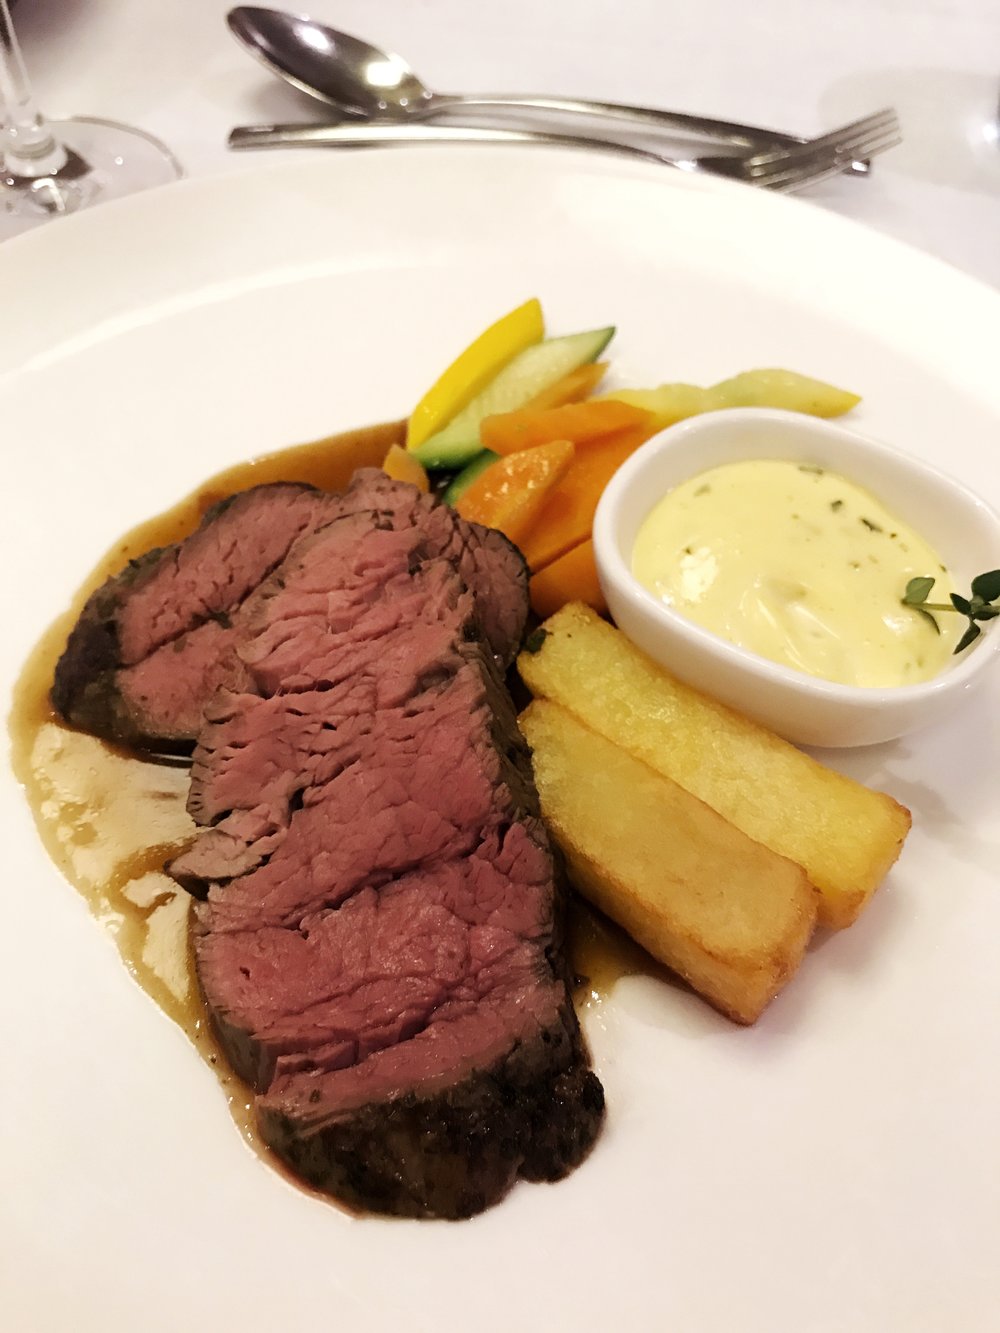 Chateaubriand - perfectly medium rare!